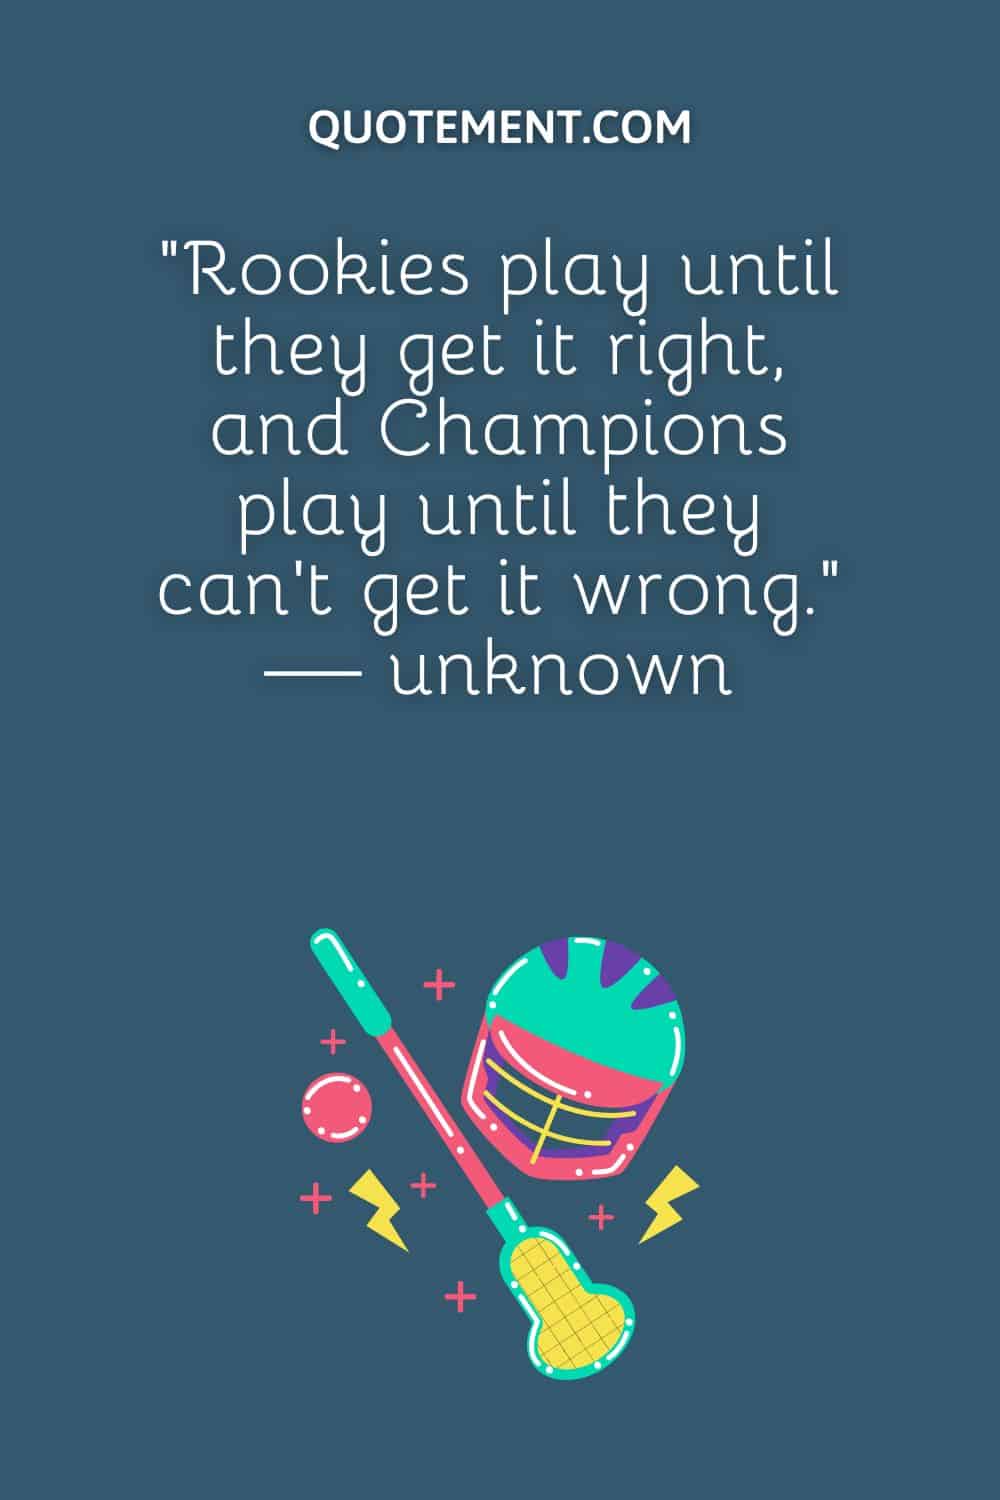 “Rookies play until they get it right, and Champions play until they can’t get it wrong.” — unknown